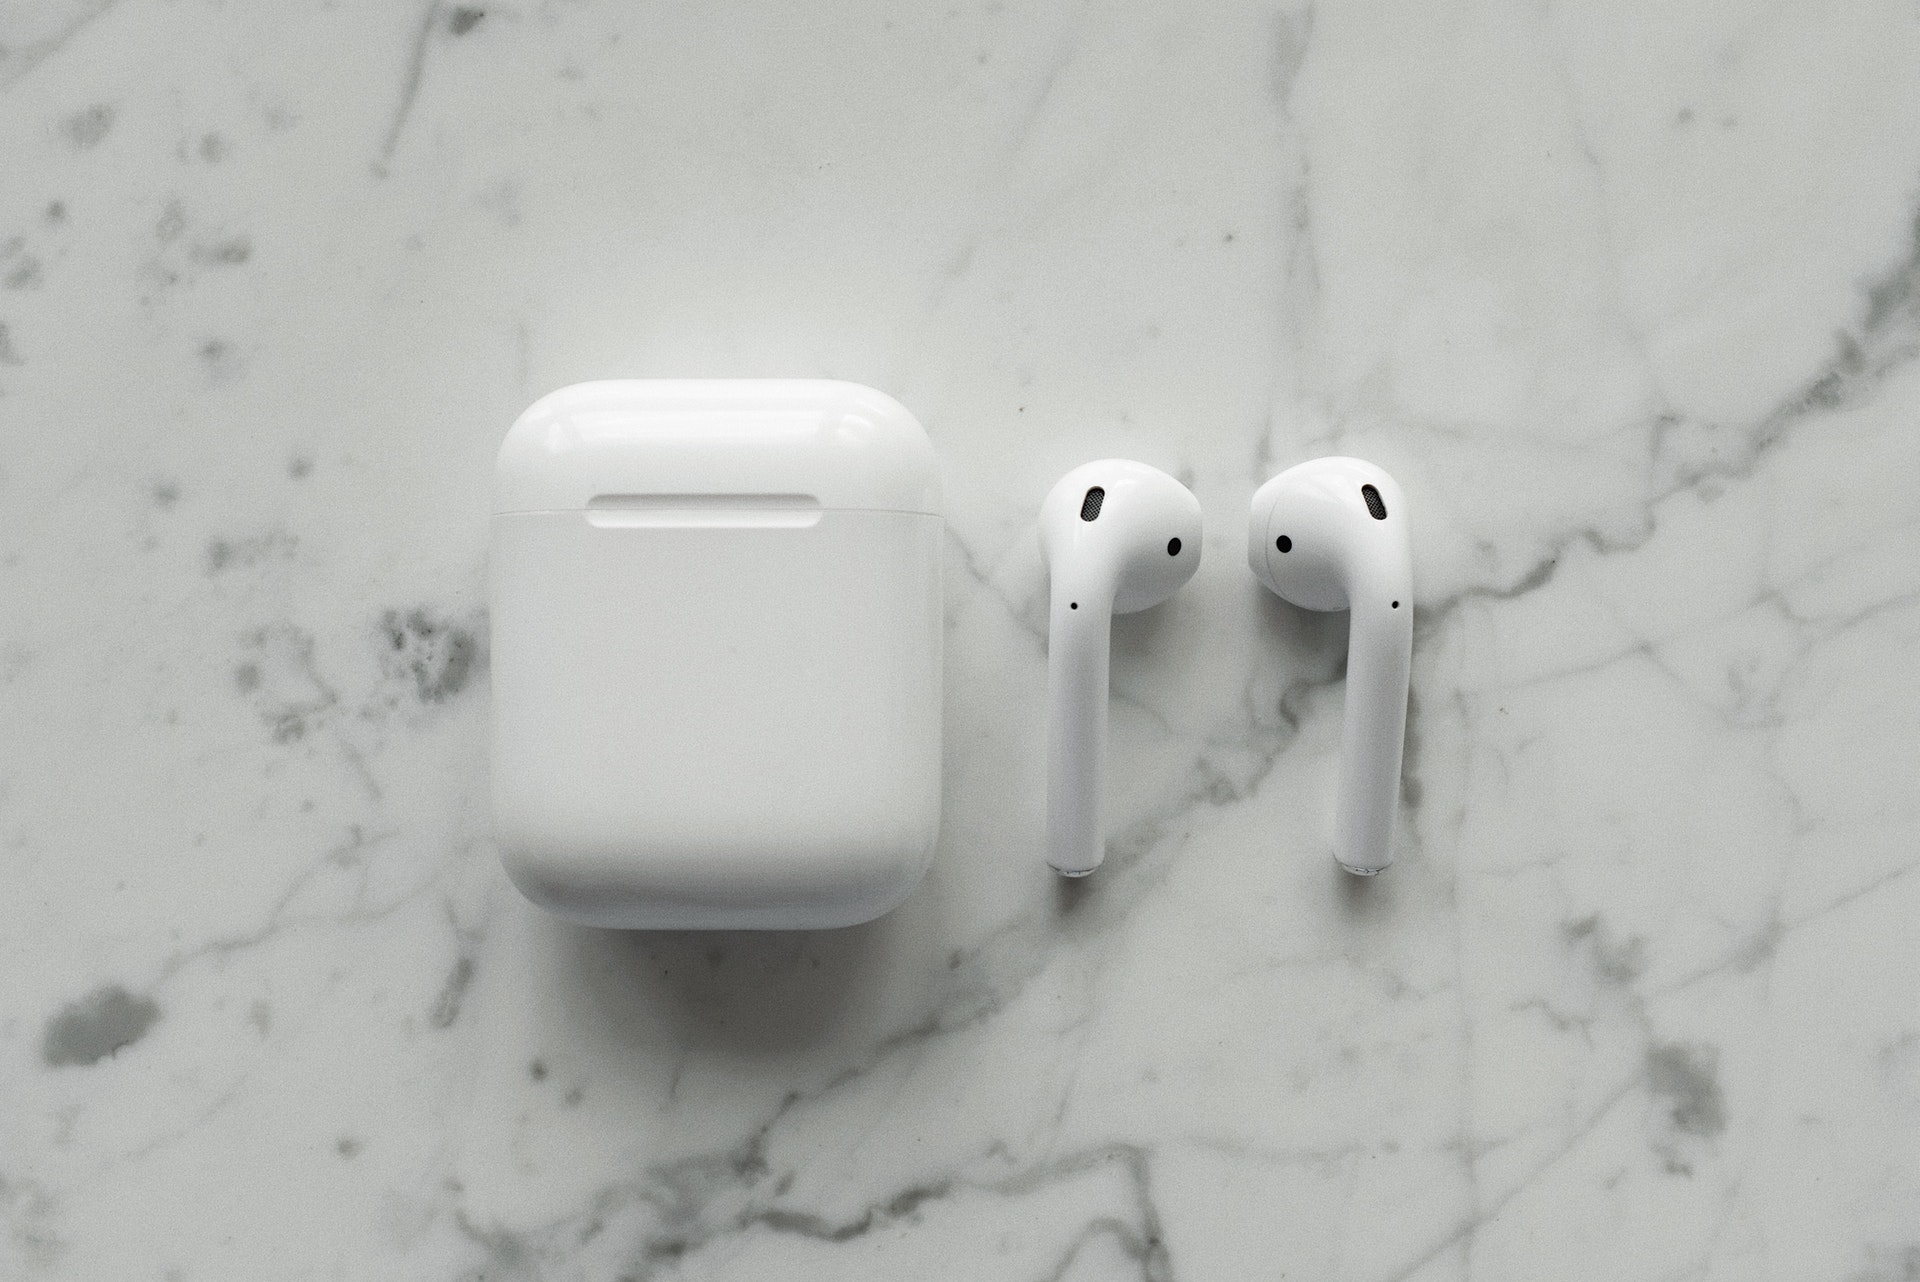 What I hope to see in Apple’s AirPods Pro 2